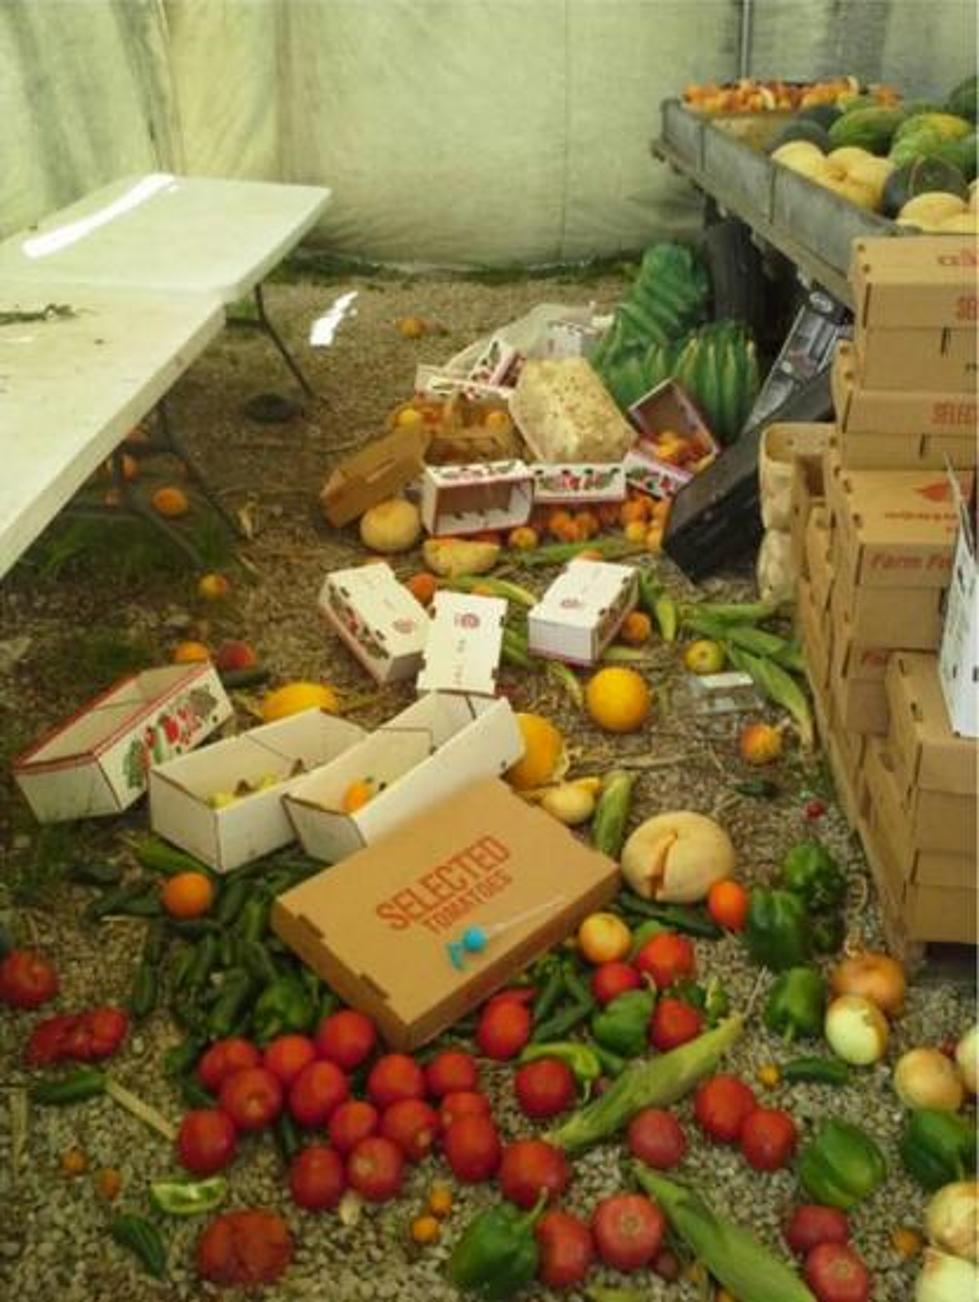 Henderson Produce Stand Vandalized, Reward Offered for Information Leading to Arrest!